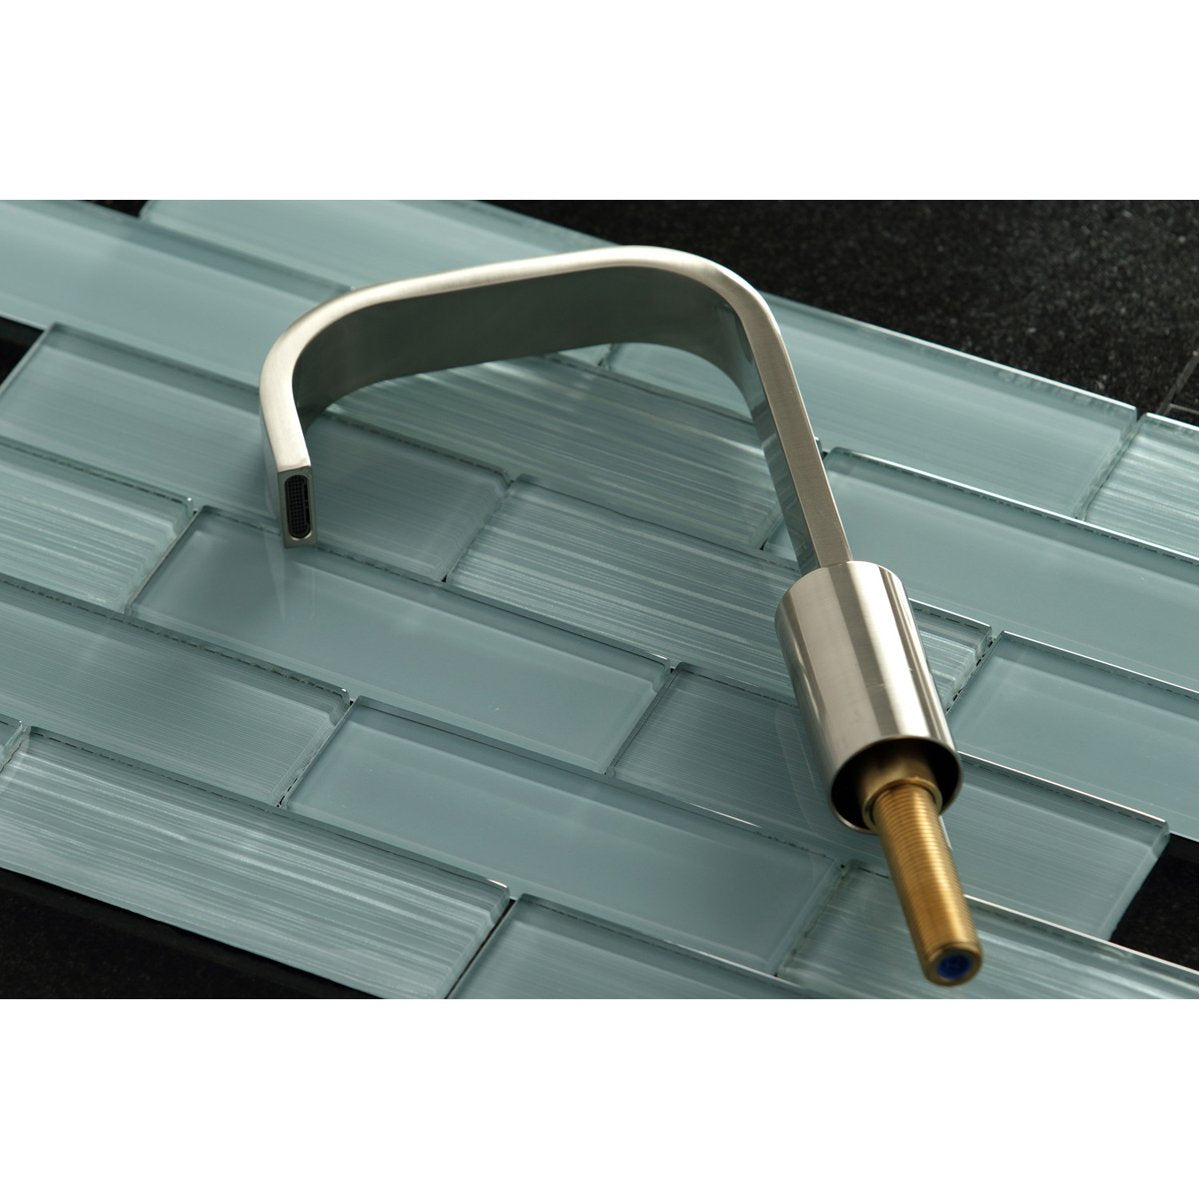 Kingston Brass Meridian Fauceture 8-Inch Widespread Bathroom Faucet